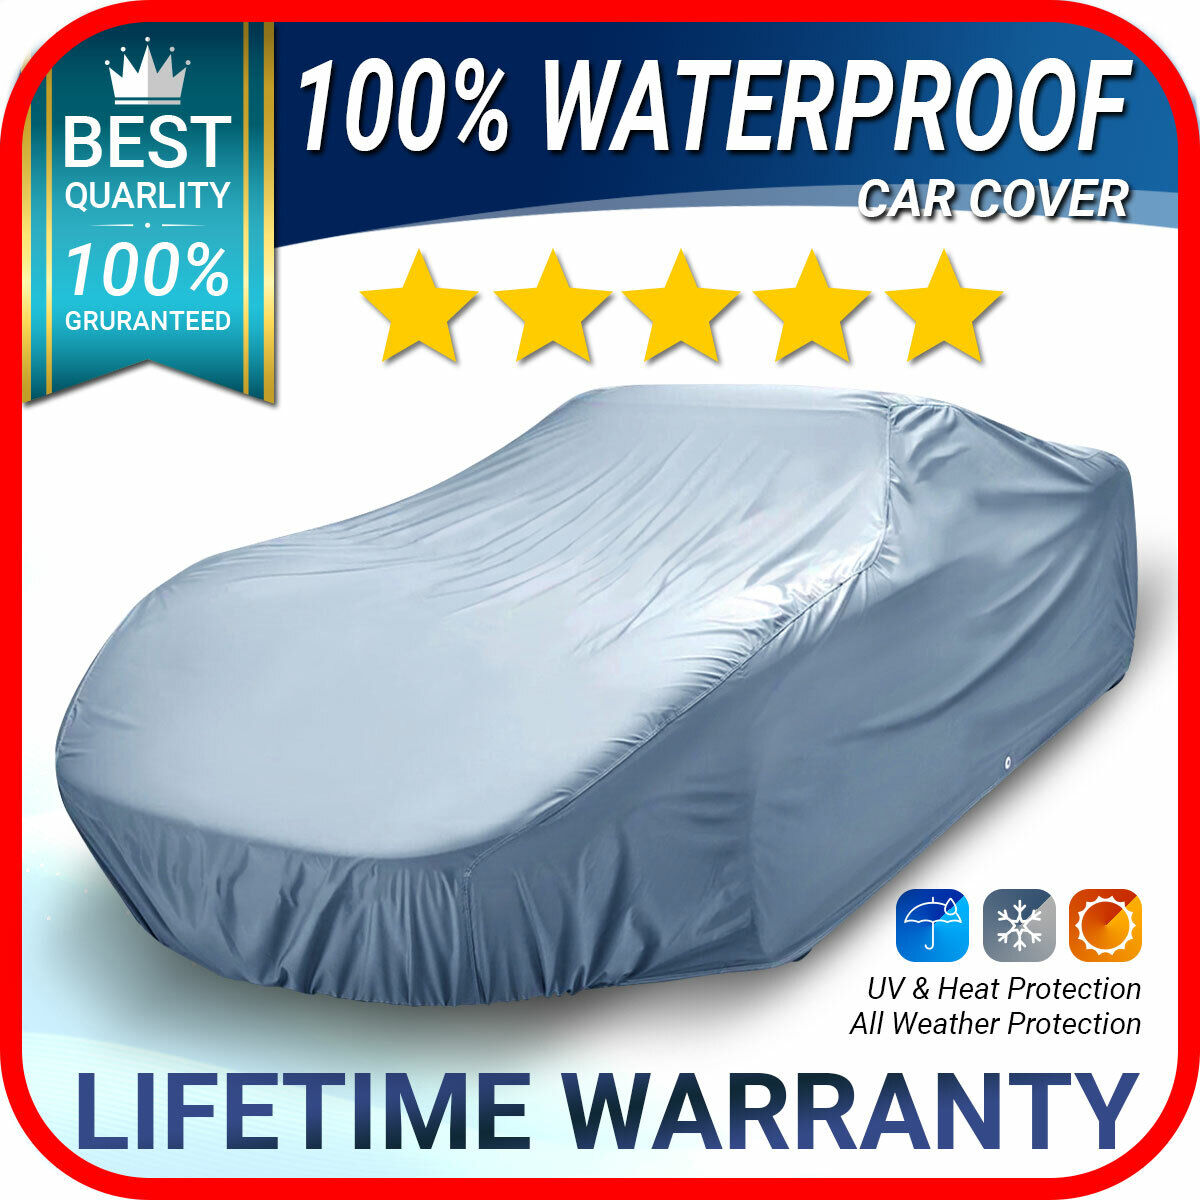 Fits PONTIAC [OUTDOOR] CAR COVER ☑️ All Weather ☑️ 100% Waterproof ✔